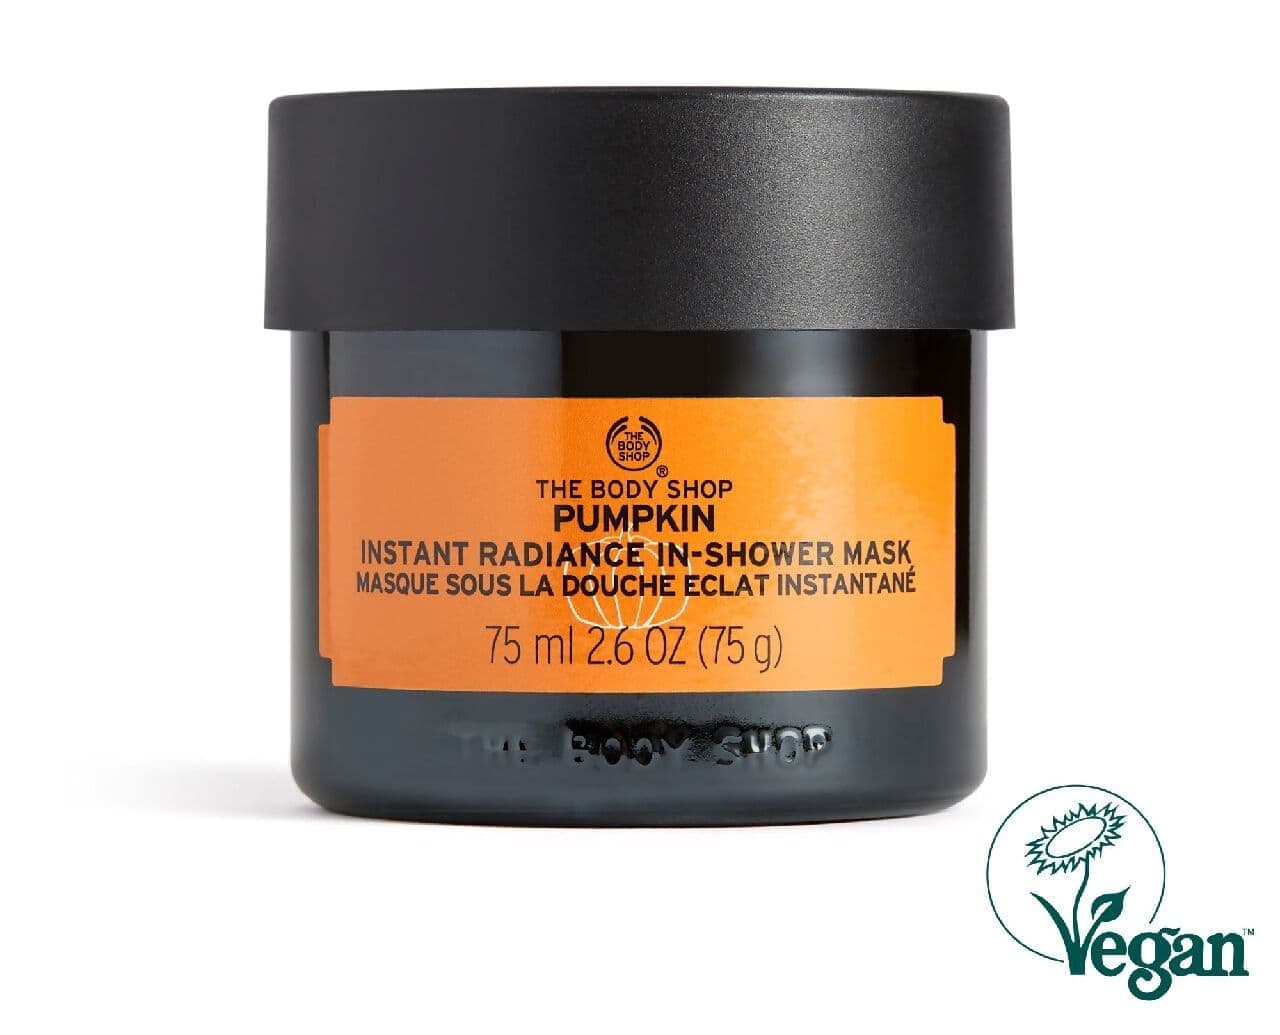 The Body Shop "PA Instant Radiance Mask".